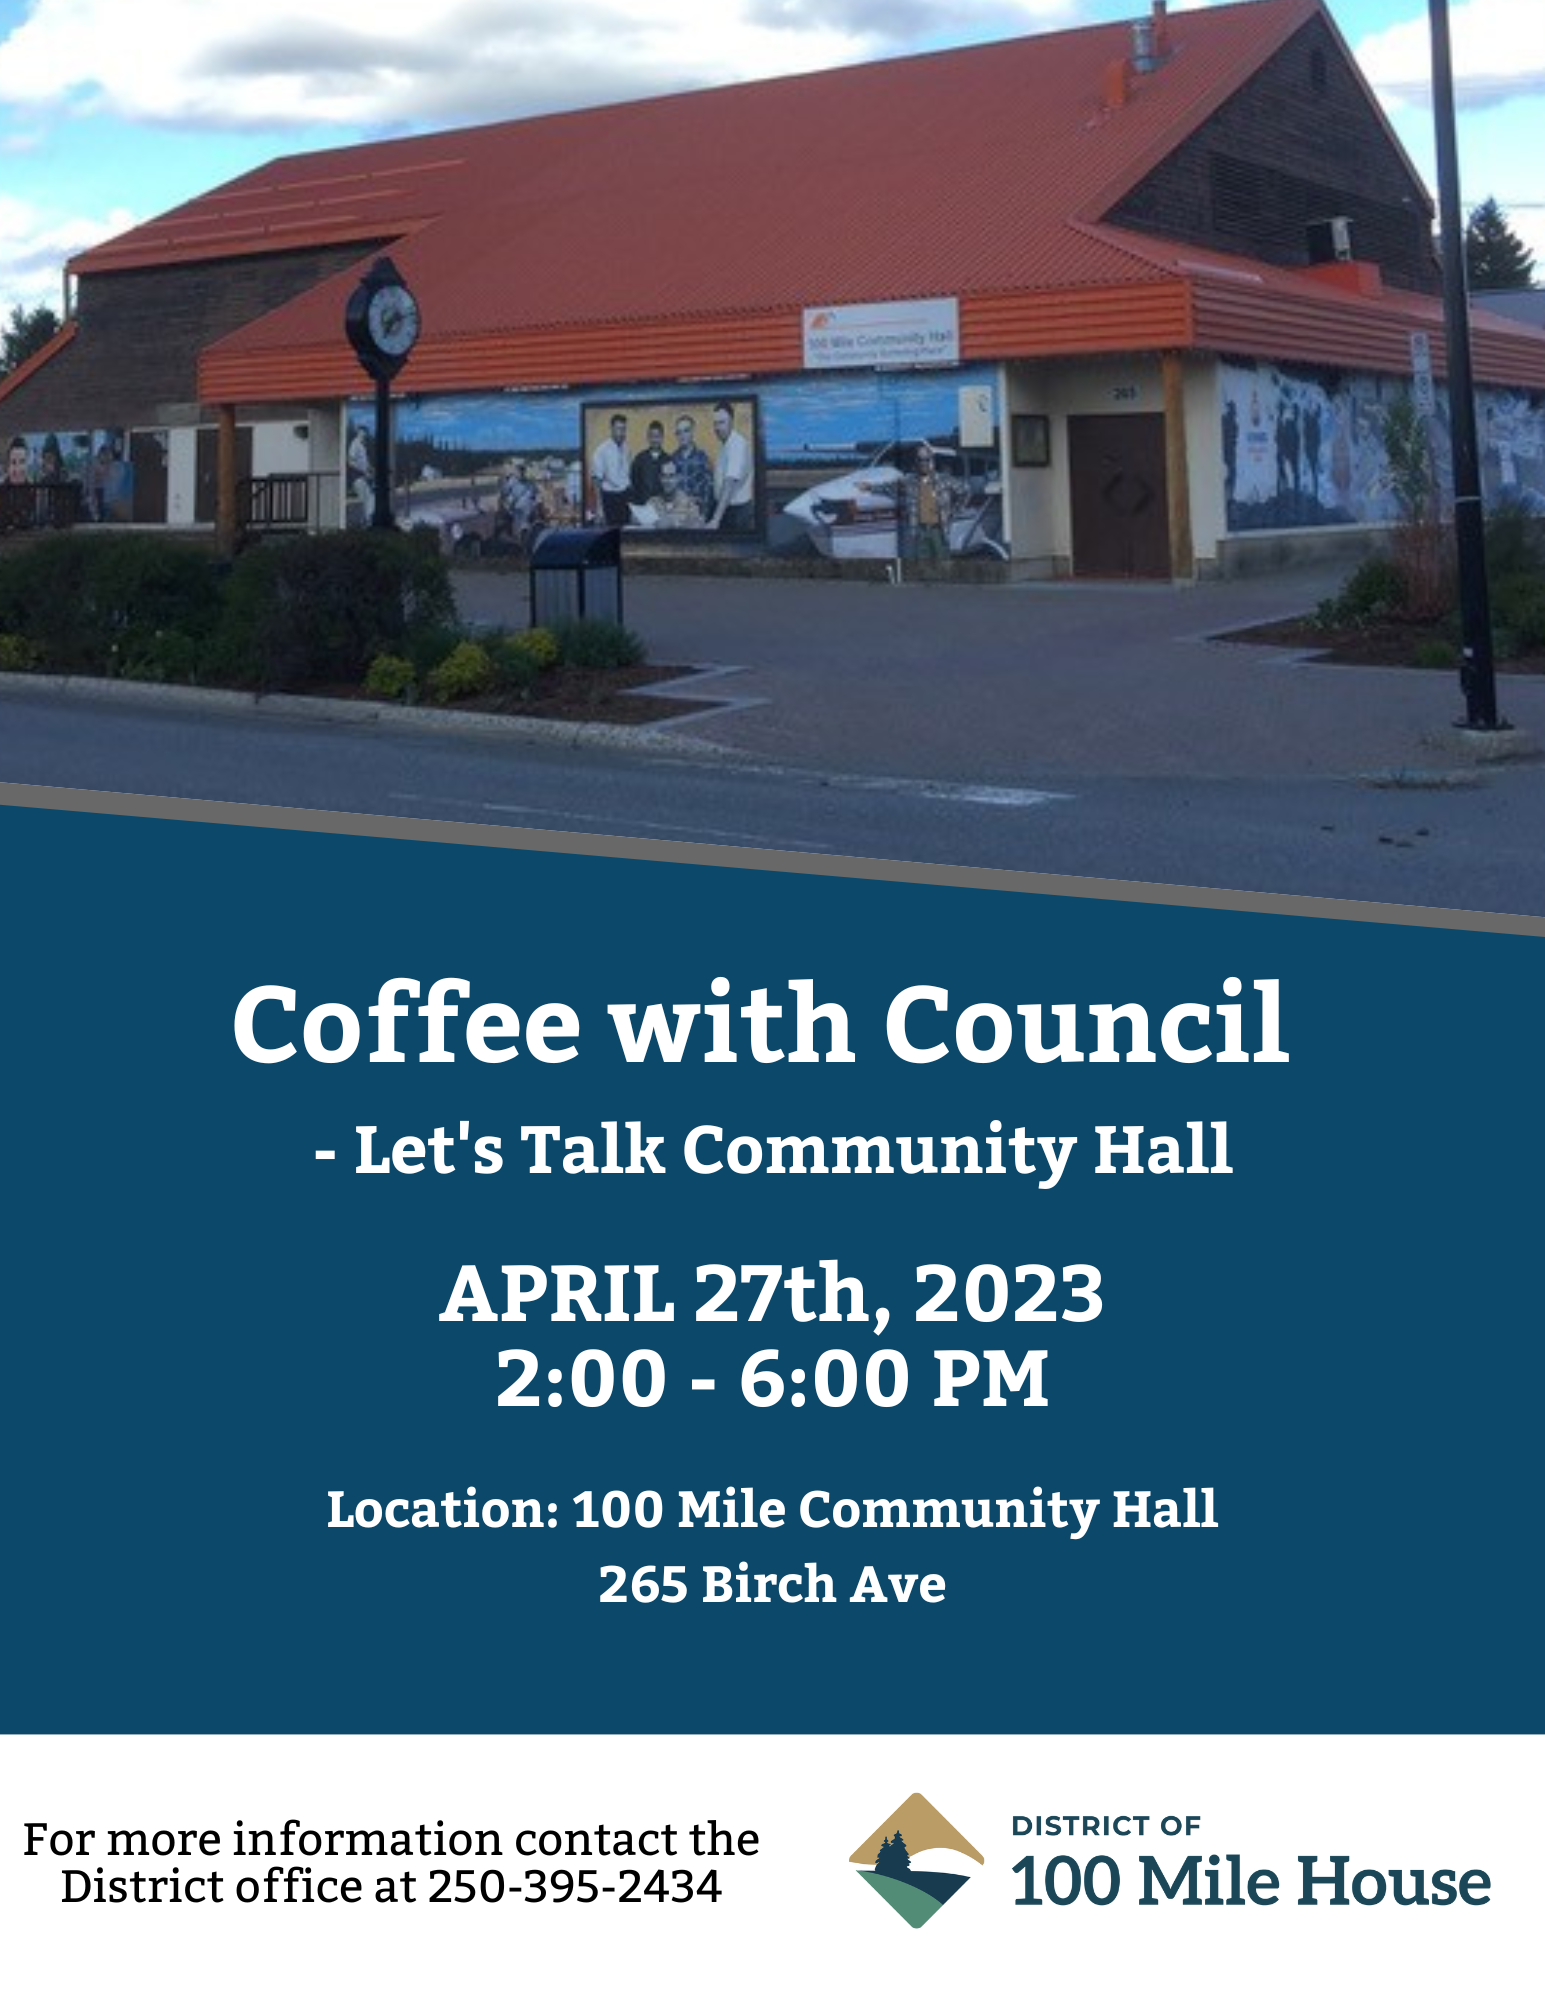 Coffee with Council - Community Hall